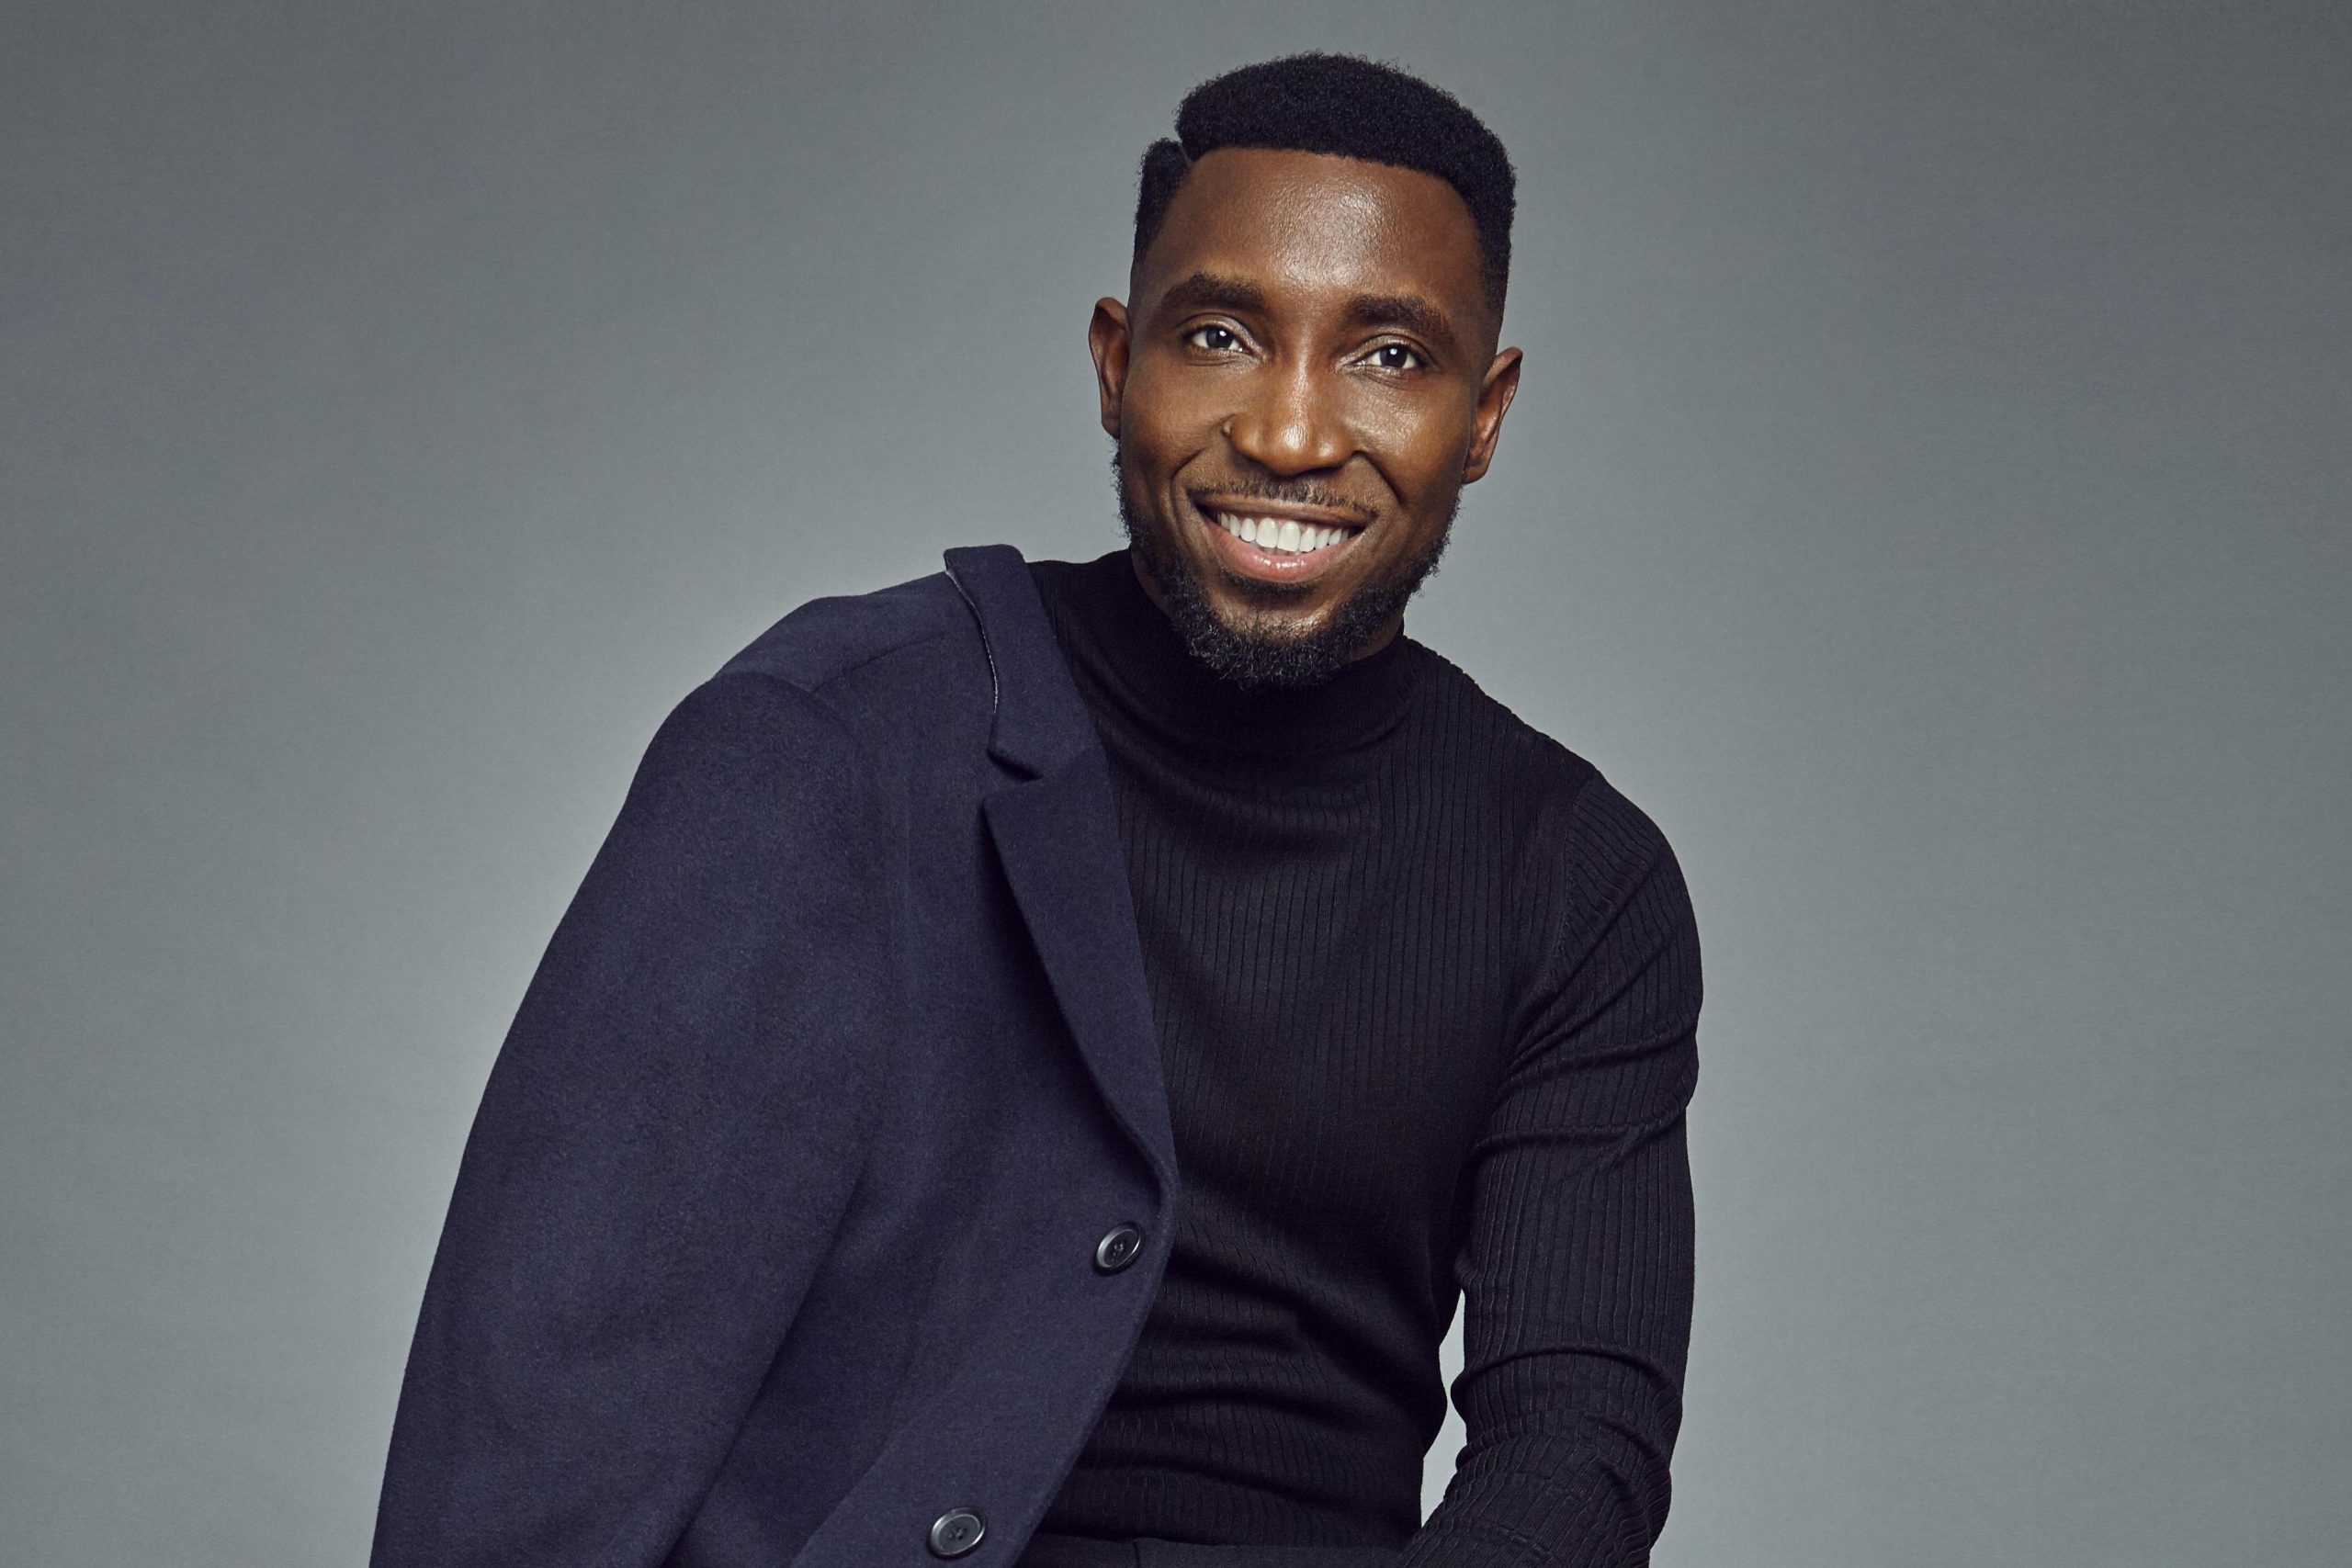 ‘Avoid religious gatherings that only see bad things’ – Timi Dakolo warns